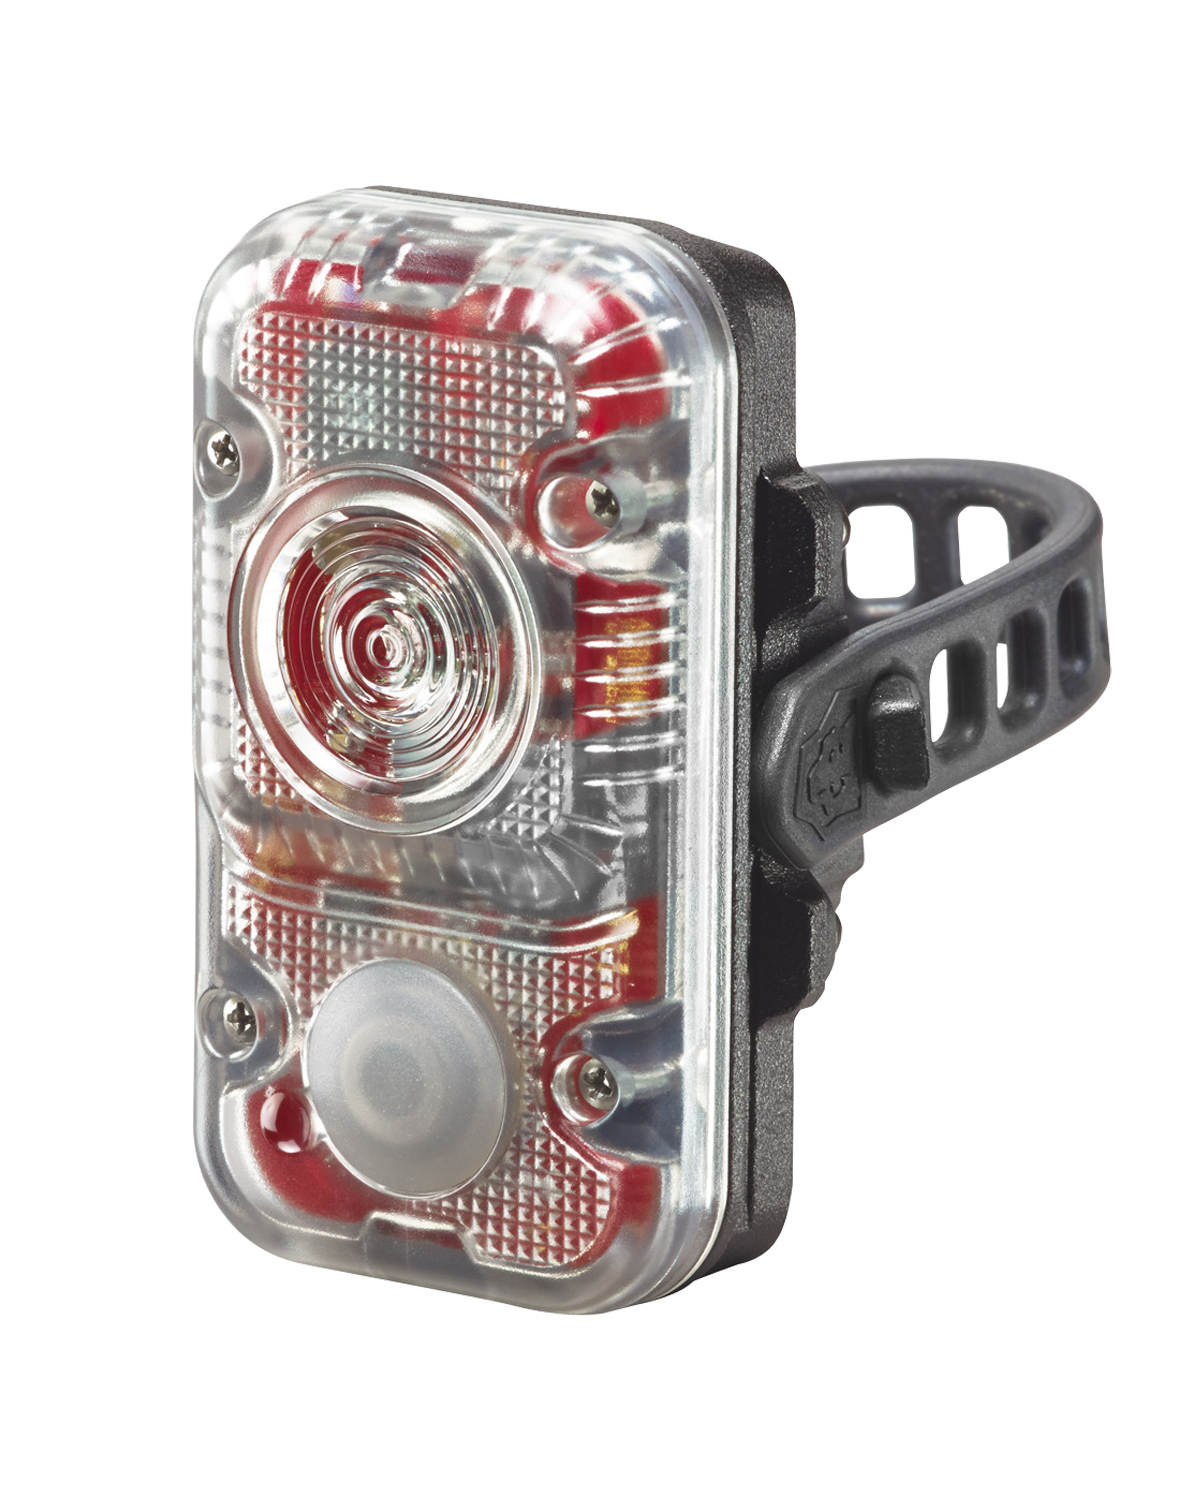 Lupine Rotlicht bicycle light with brake light function